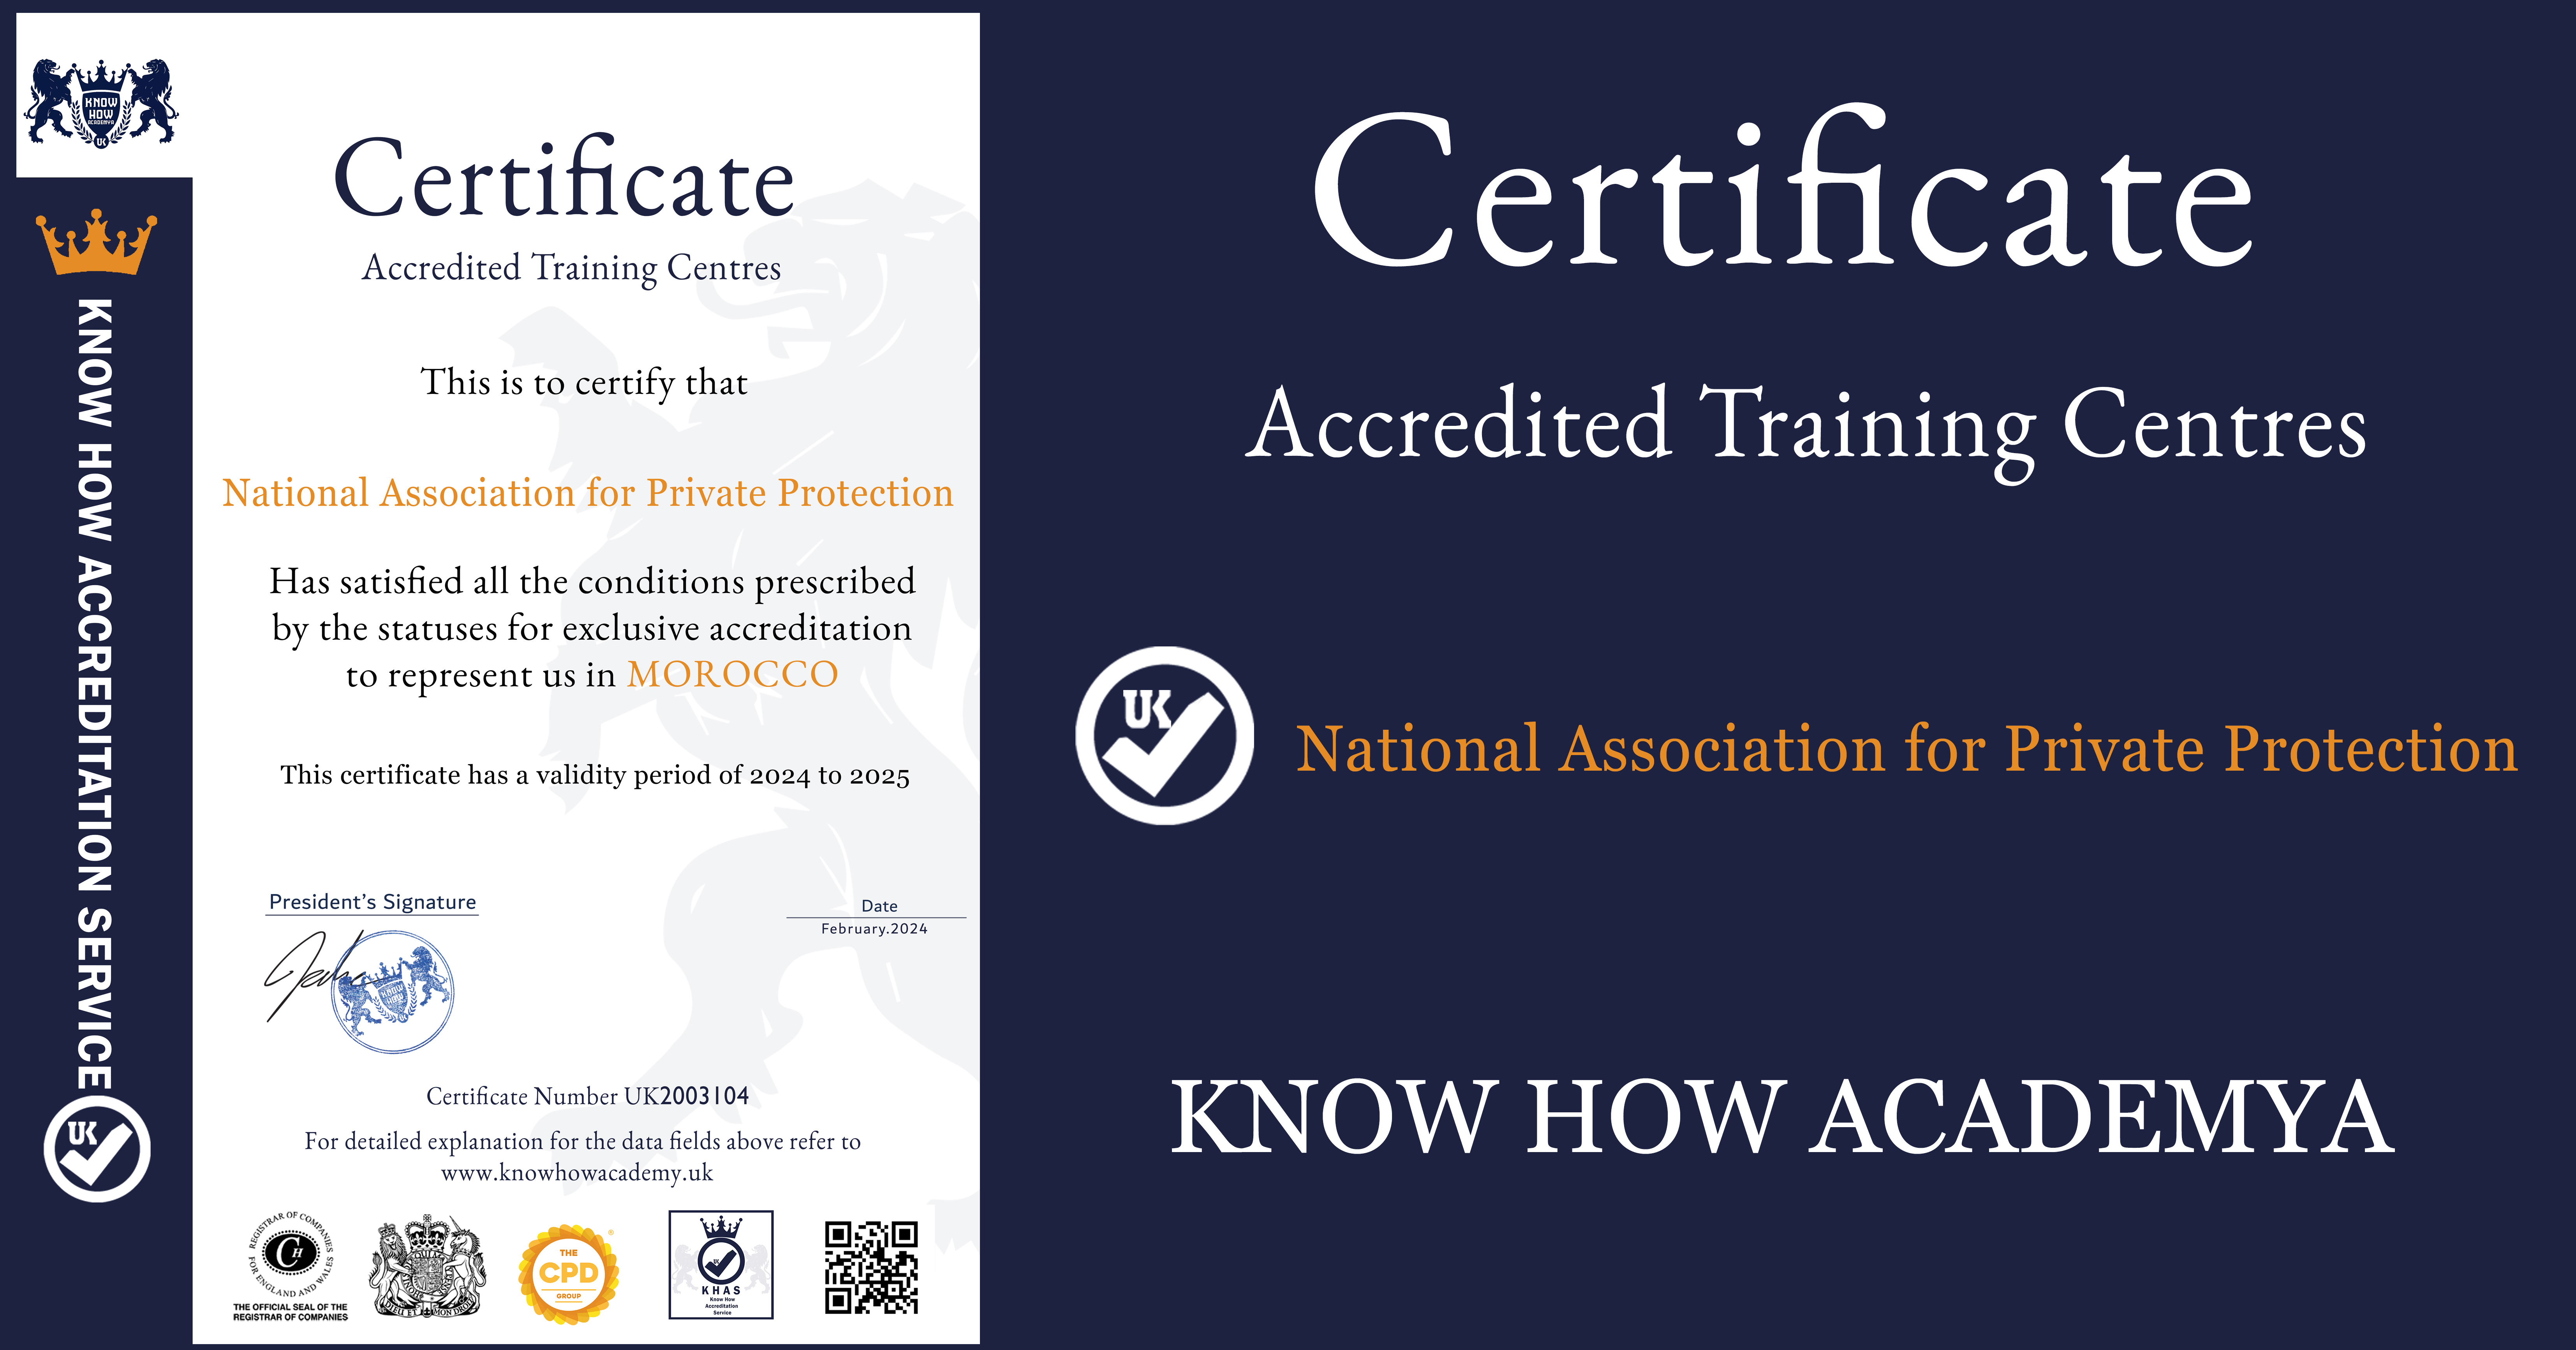 National Association for Private Protection